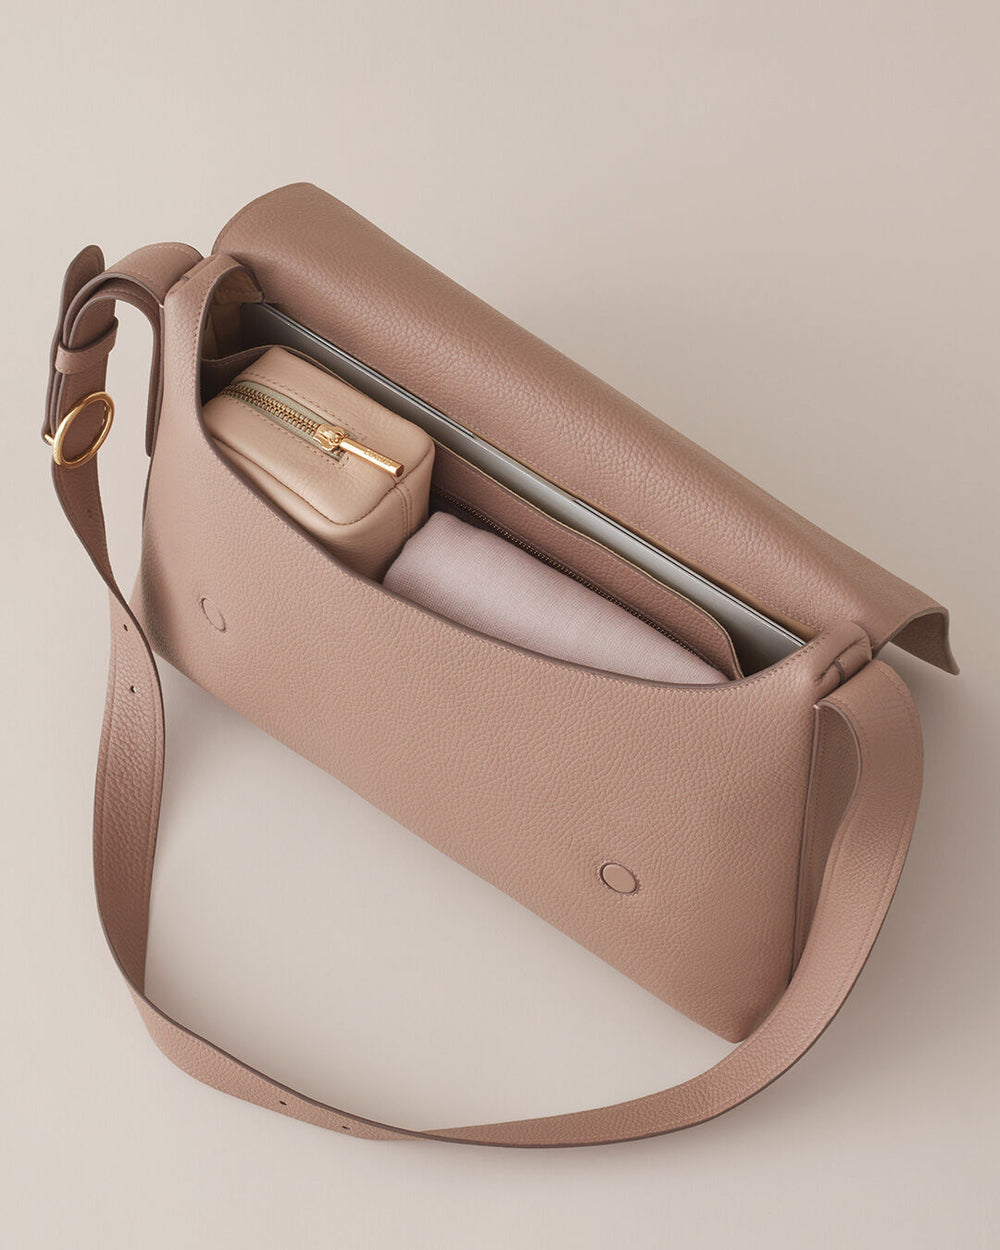 Open handbag with visible contents and a shoulder strap.